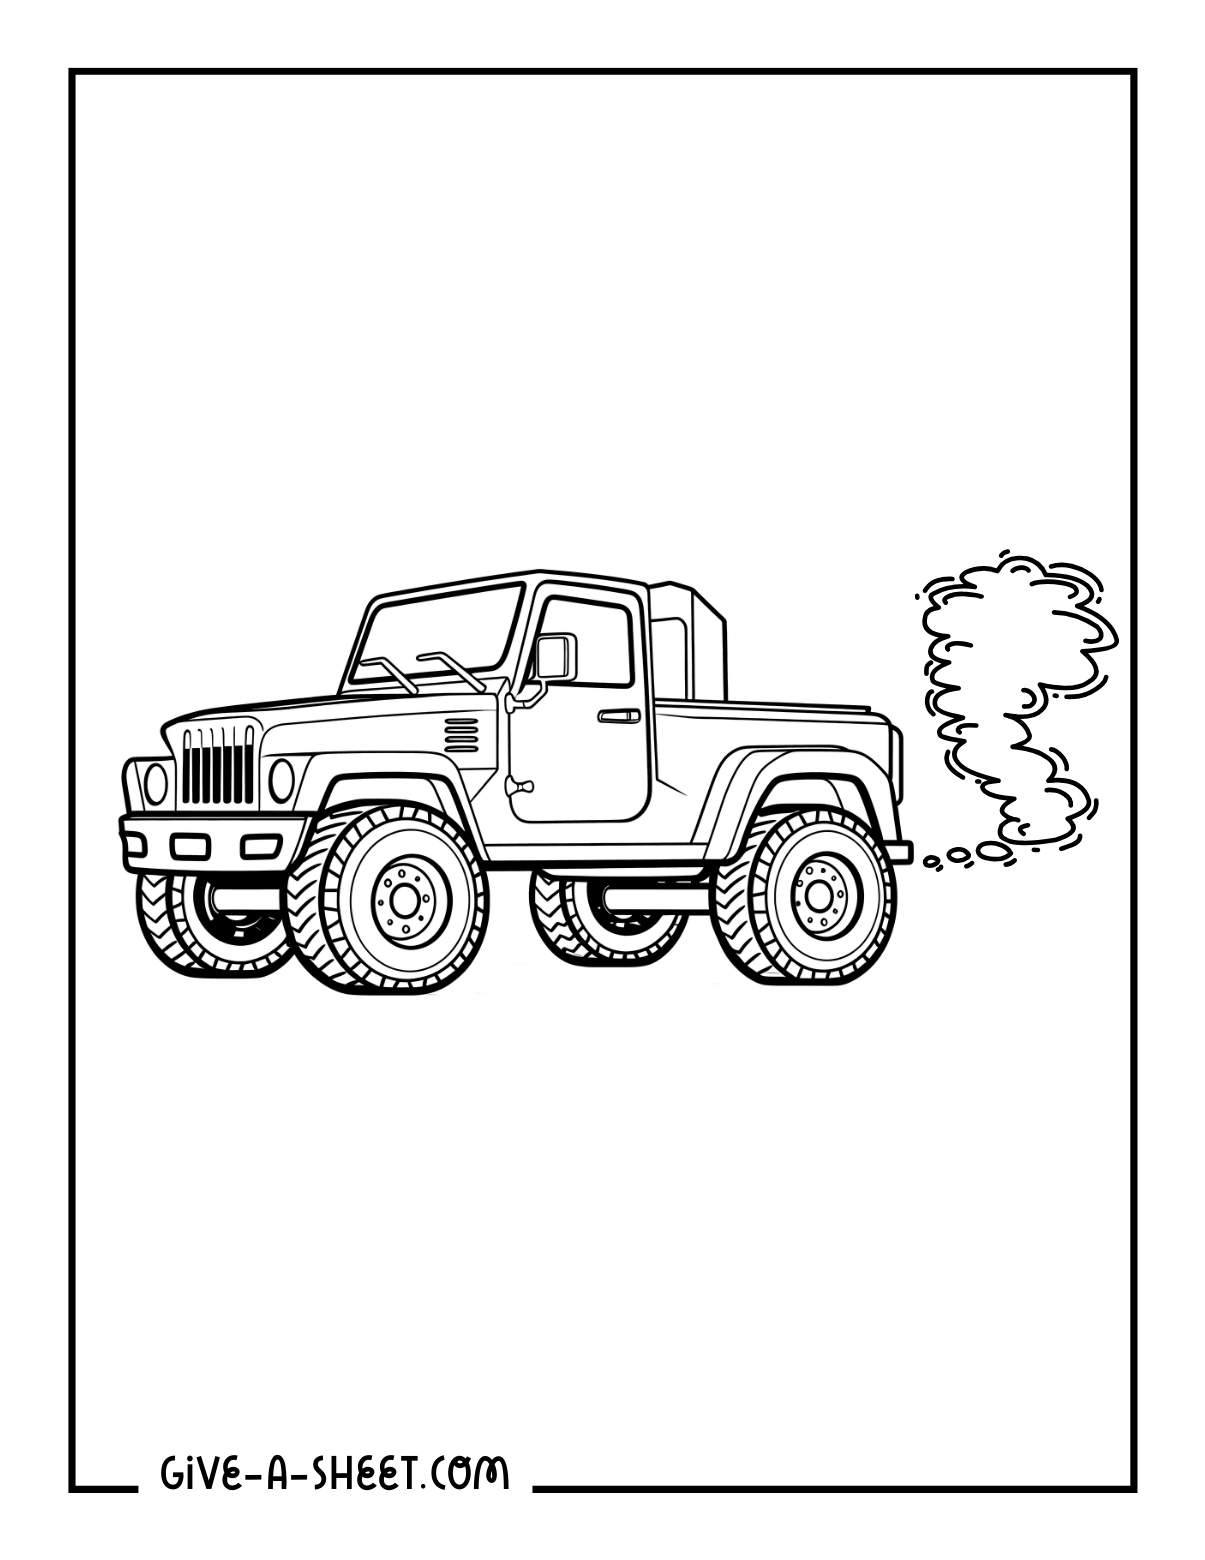 Truck coloring page exhaust smoke.